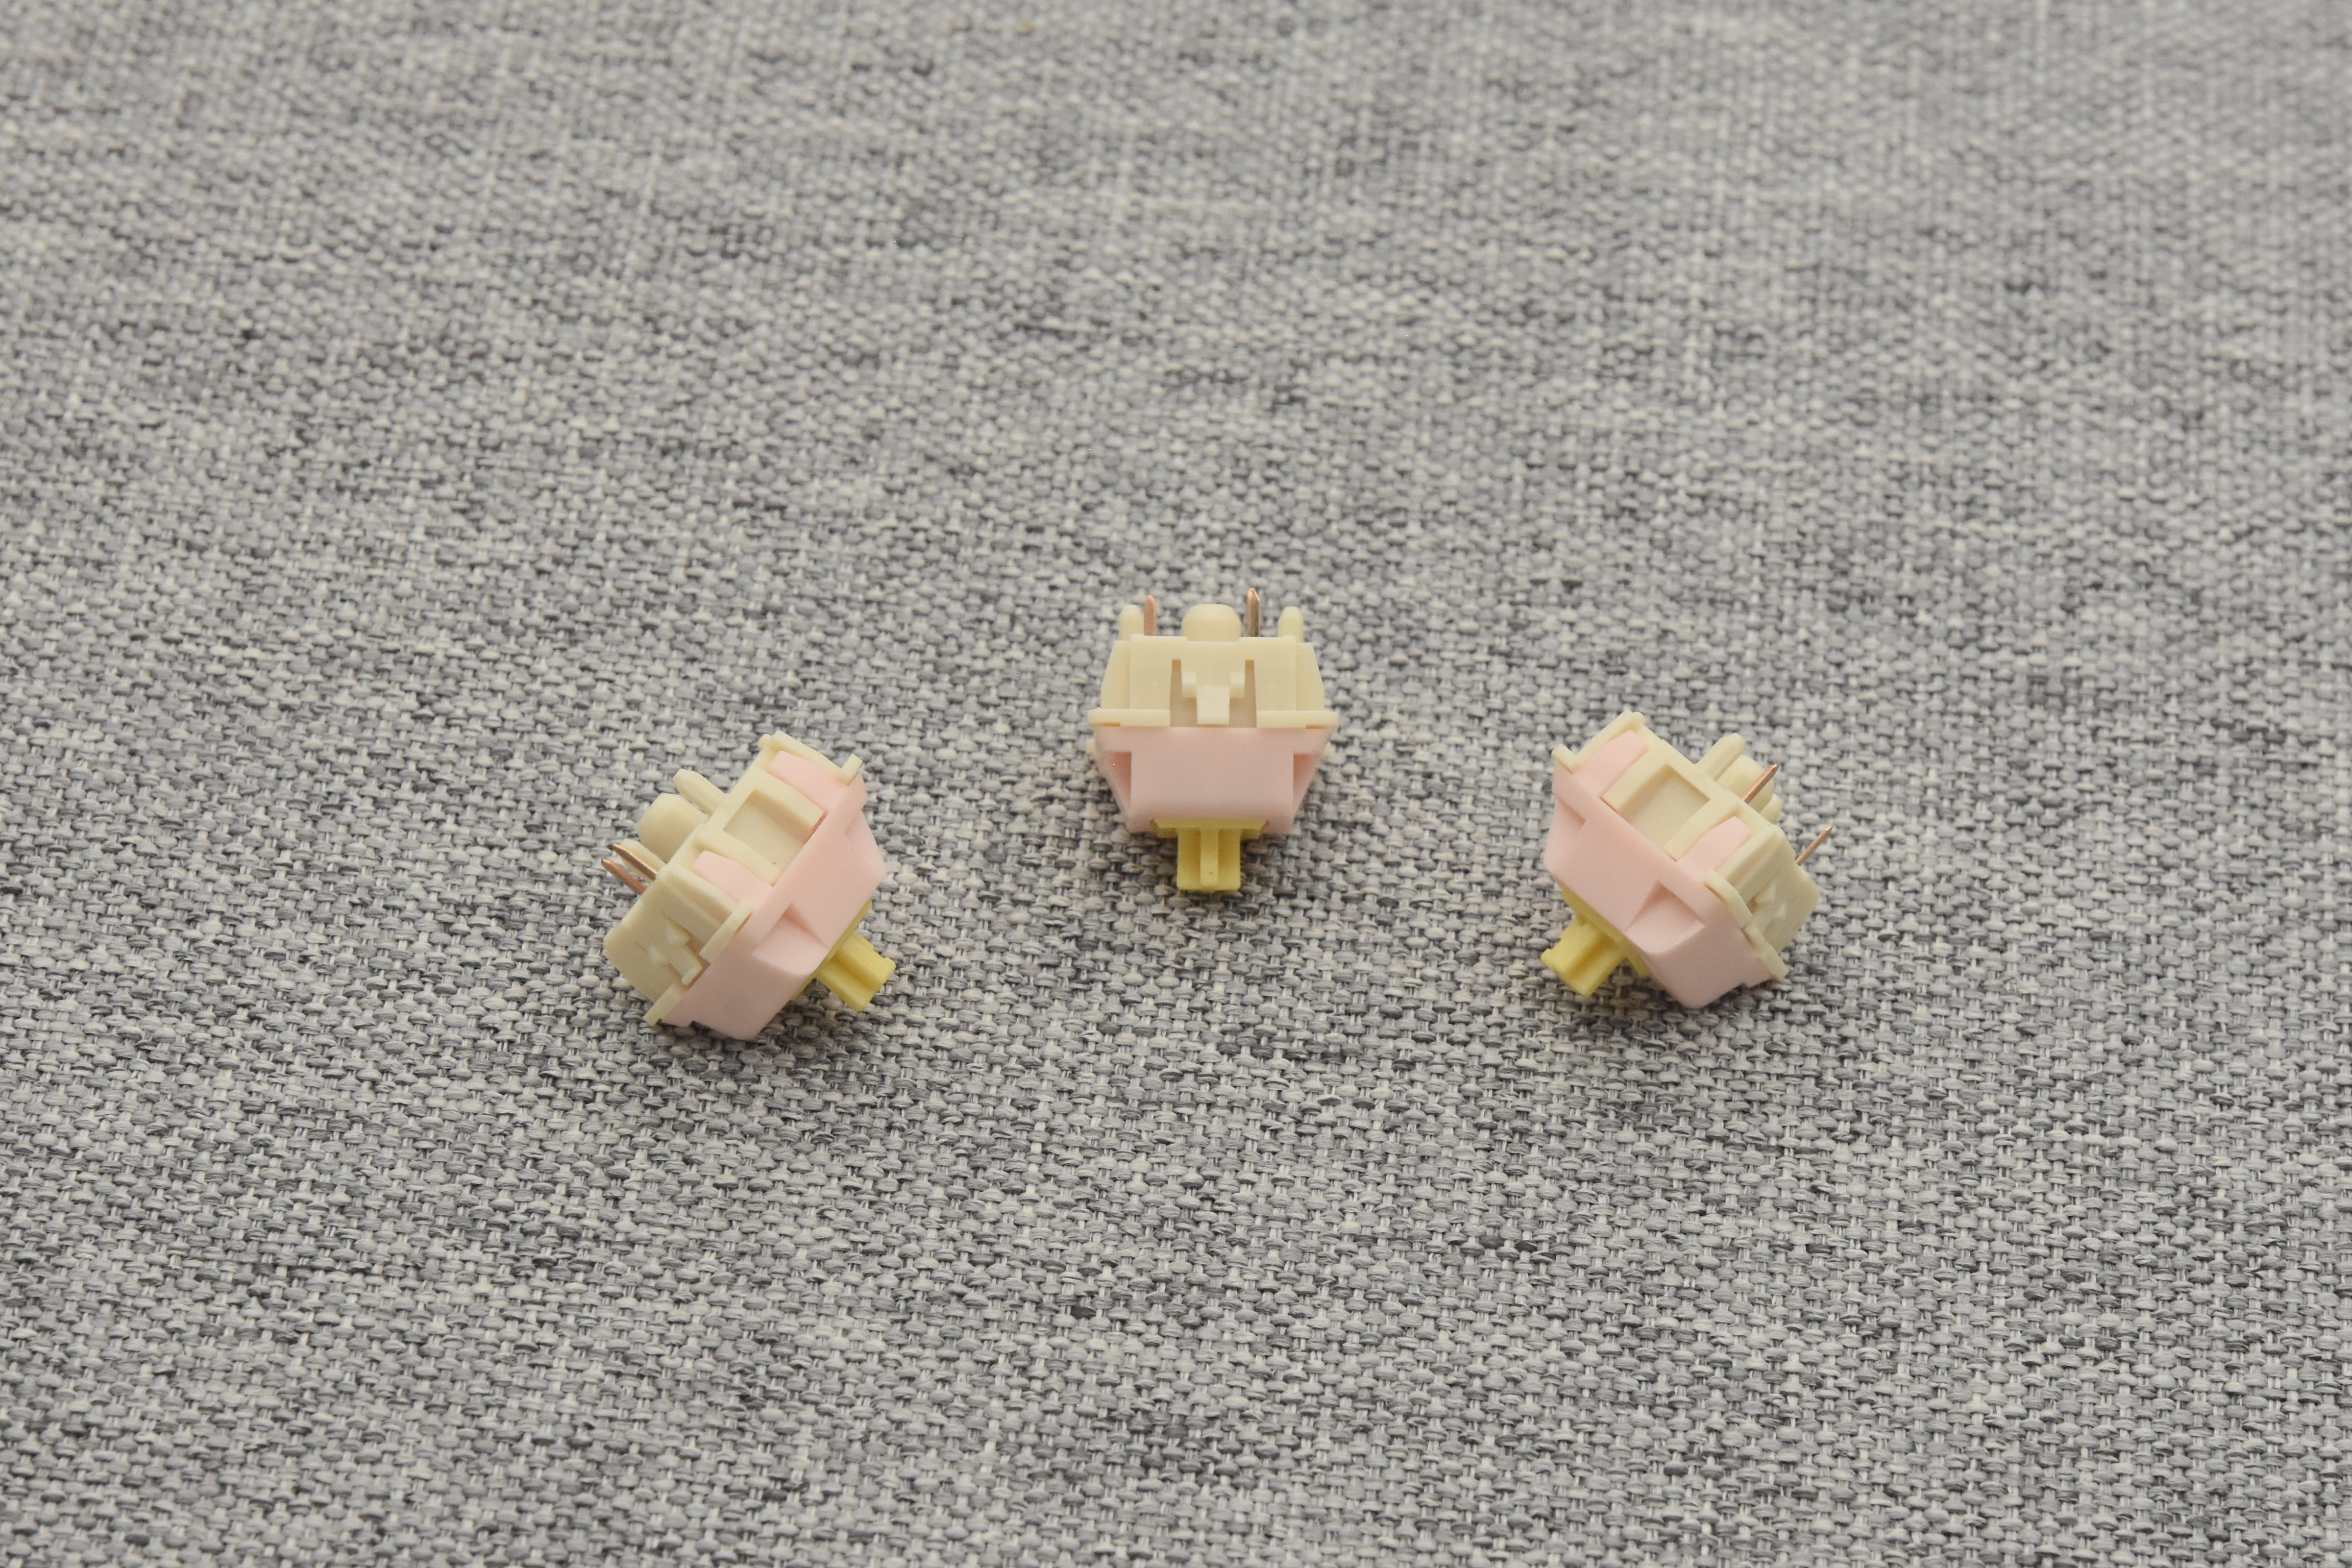 BSUN SAKURA LINEAR SWITCHES FACTORY LUBED (10PCS)